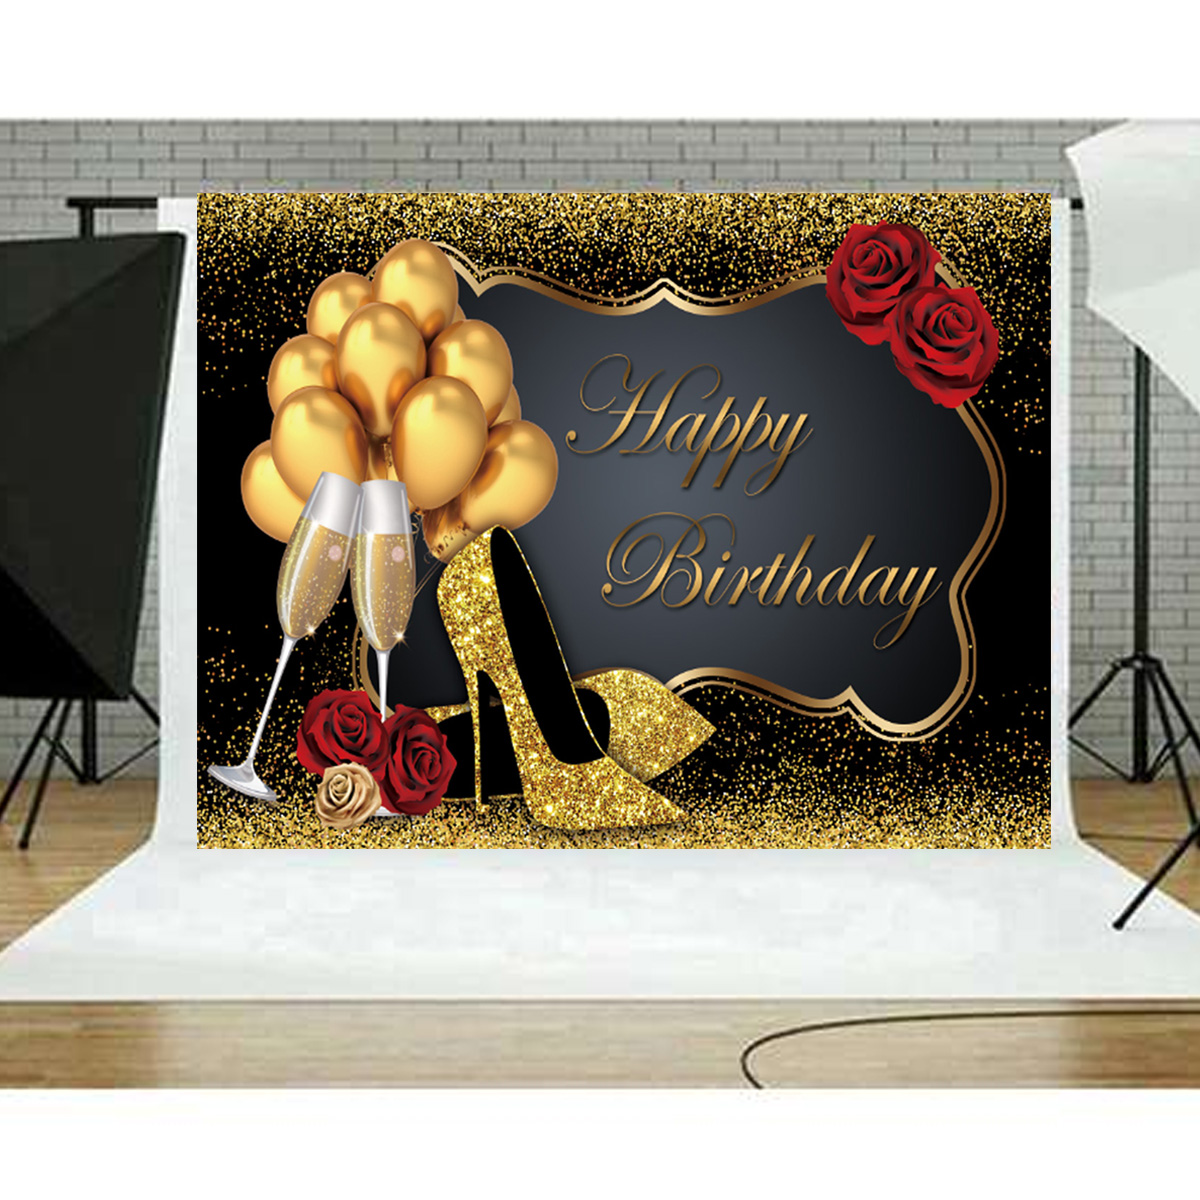 Find 5x3FT 7x5FT 9x6FT High Heel Glass Golden Balloon Birthday Theme Photography Backdrop Background Studio P for Sale on Gipsybee.com with cryptocurrencies